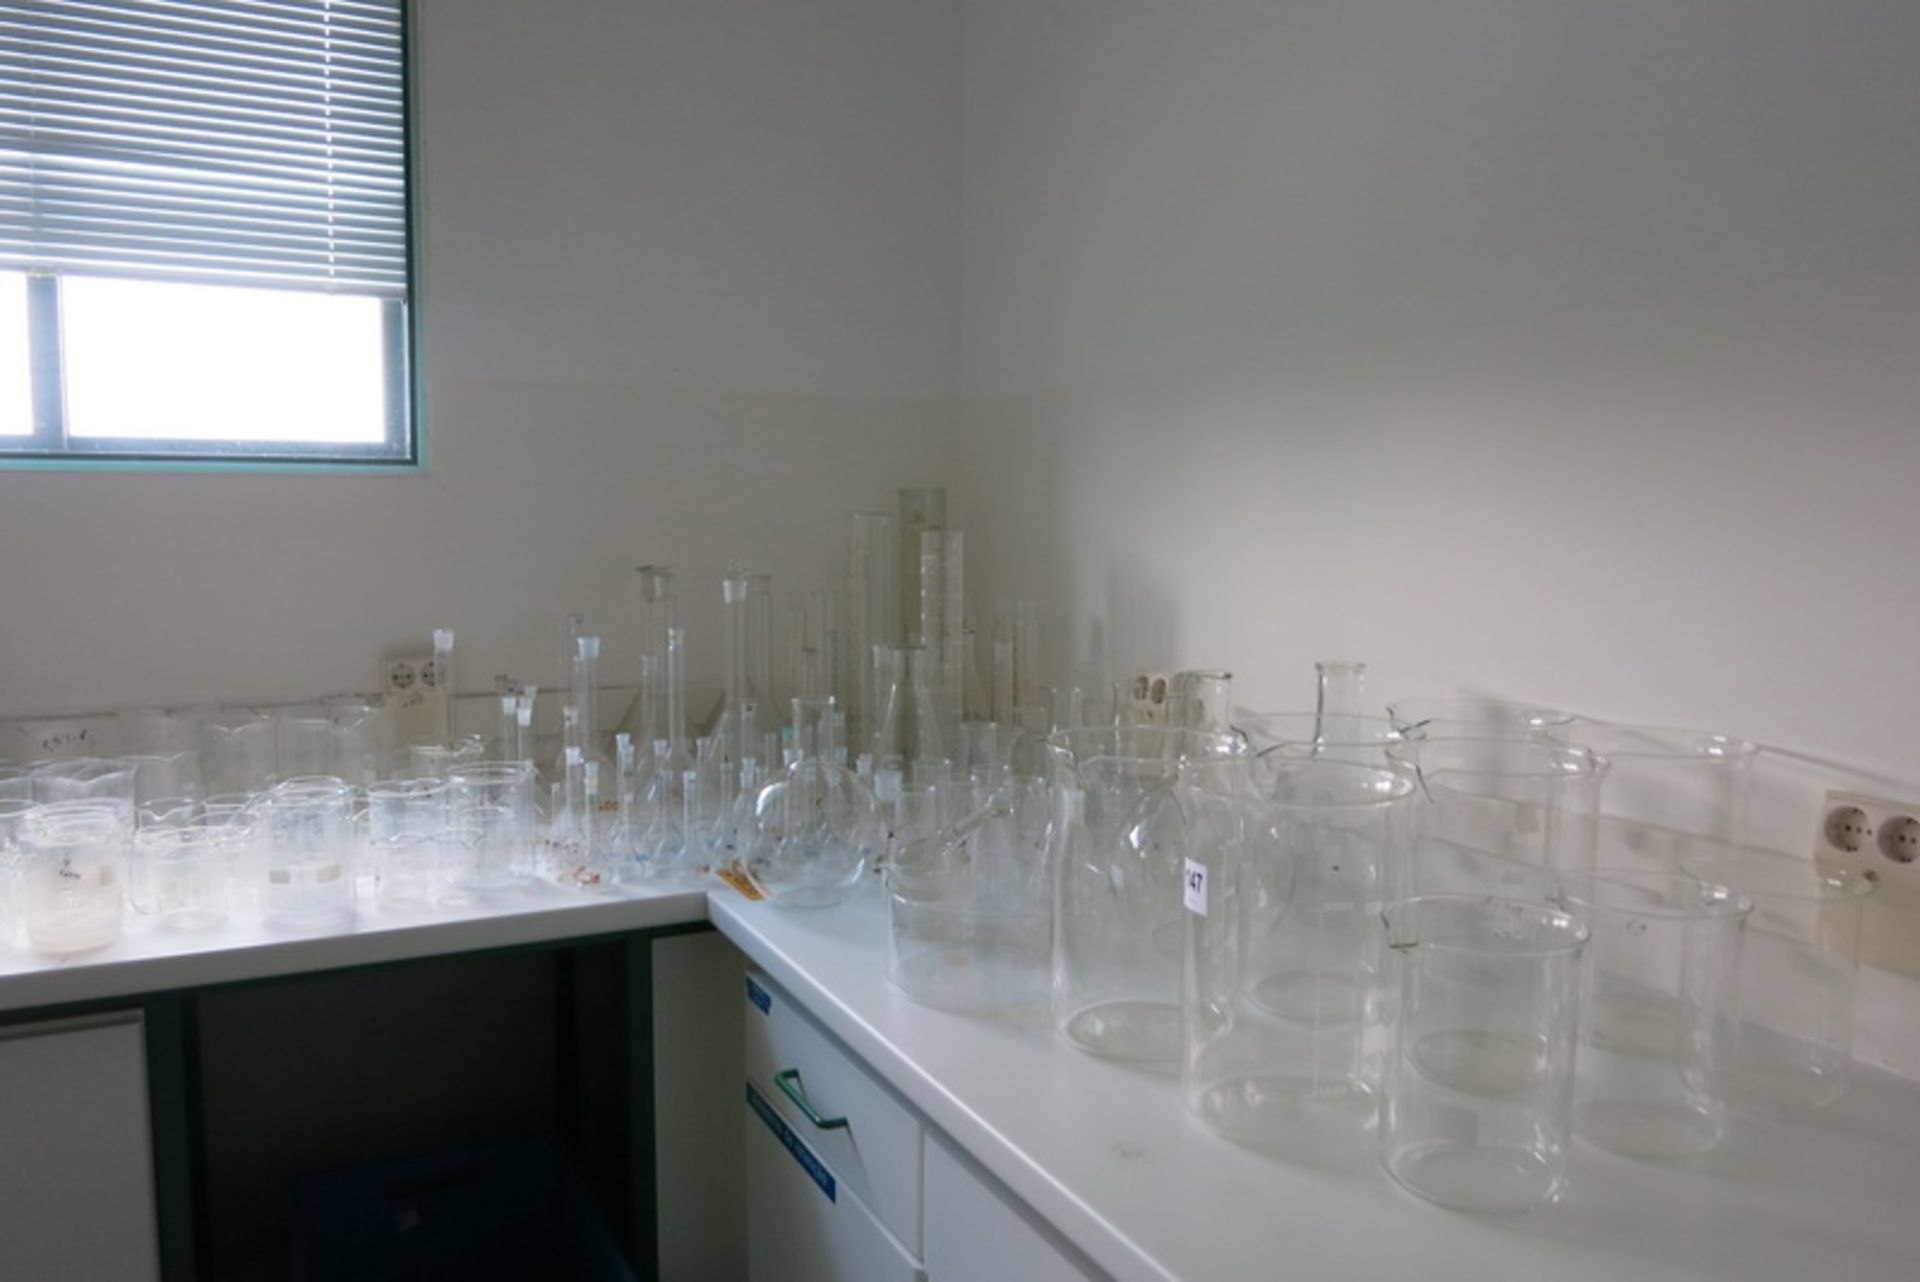 Laboratory glassware, & supplies (contents on counter)